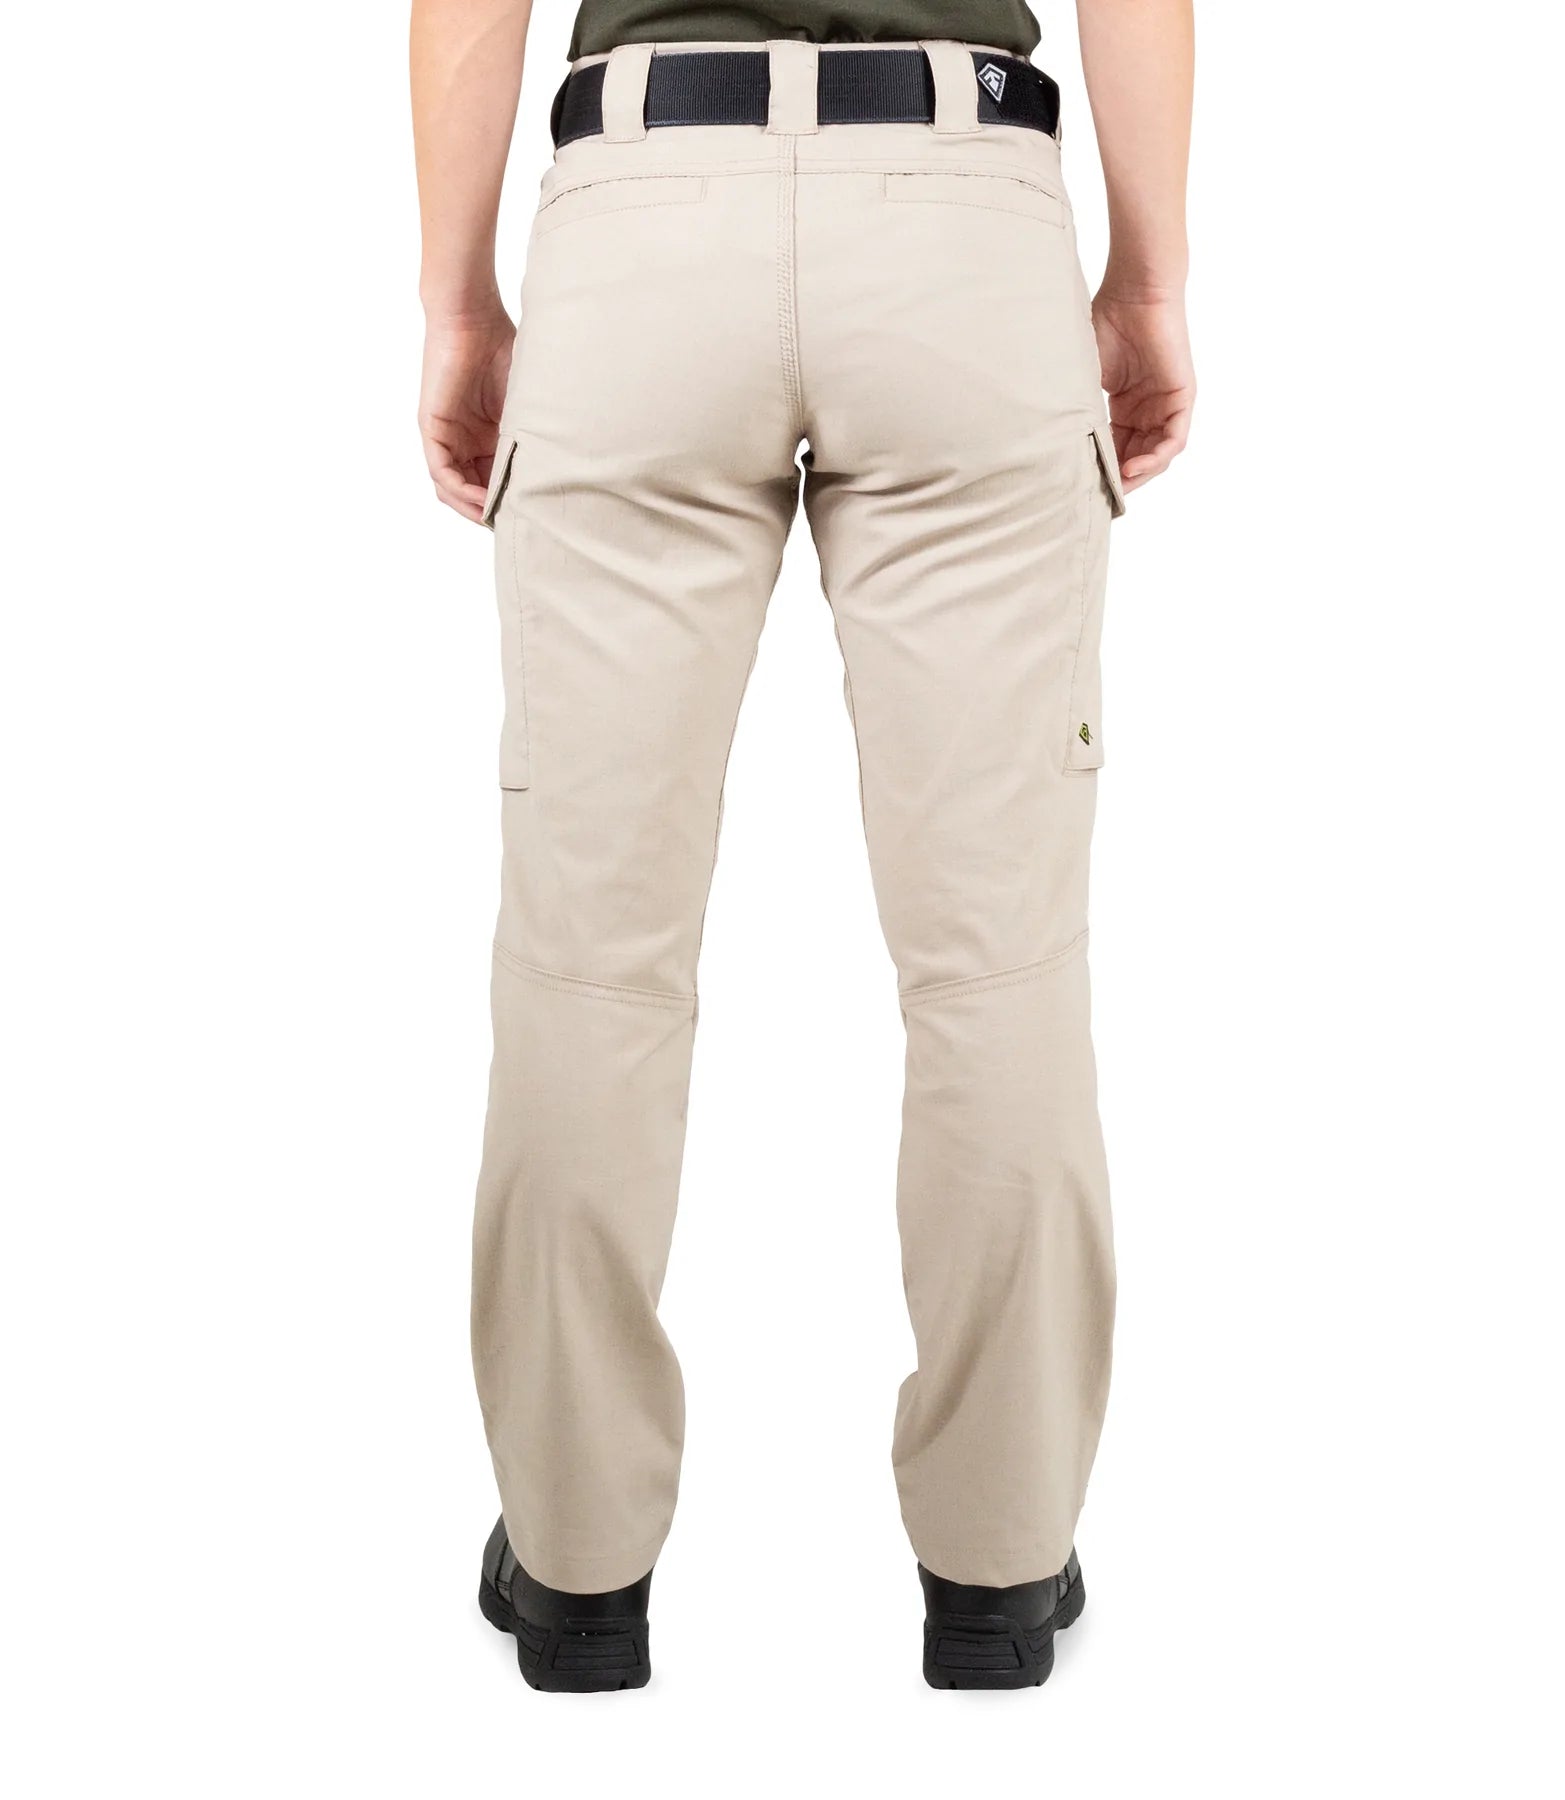 First Tactical Women's V2 Tactical Pant (124011) Midnight Navy / Khaki